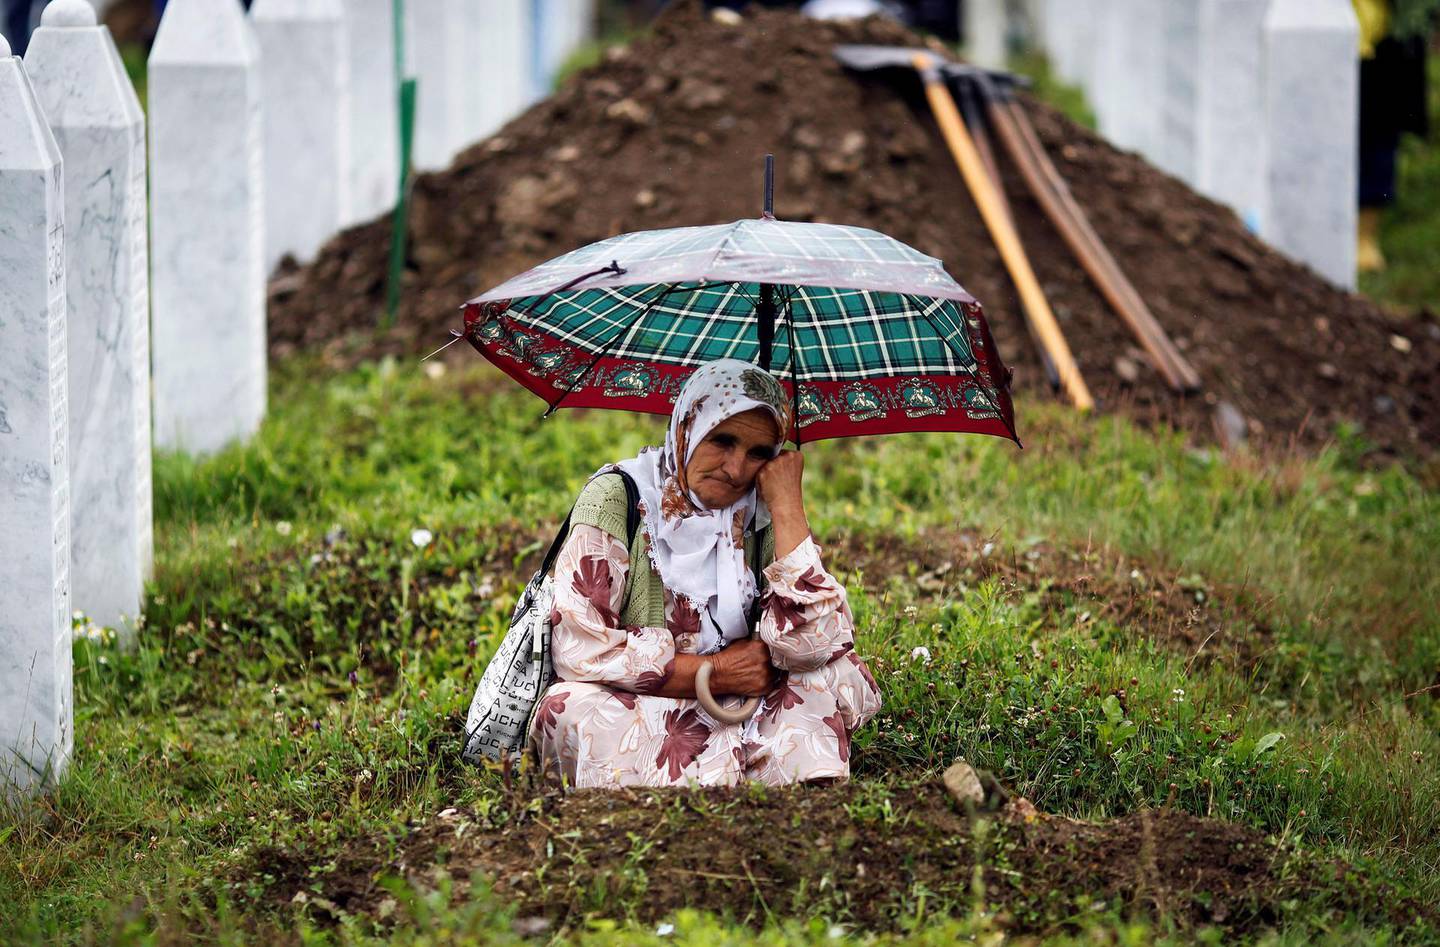 FILE PHOTO: A Muslim woman mourns by the grave of her relative during the funeral of 534 newly identified victims of the 1995 Srebrenica massacre in Potocari July 11, 2009. Bosnia will mark the 25th anniversary of the massacre of more than 8,000 Bosnian Muslim men and boys on July 11, 2020, with many relatives unable to attend due to the novel coronavirus pandemic.  REUTERS/Damir Sagolj/File Photo